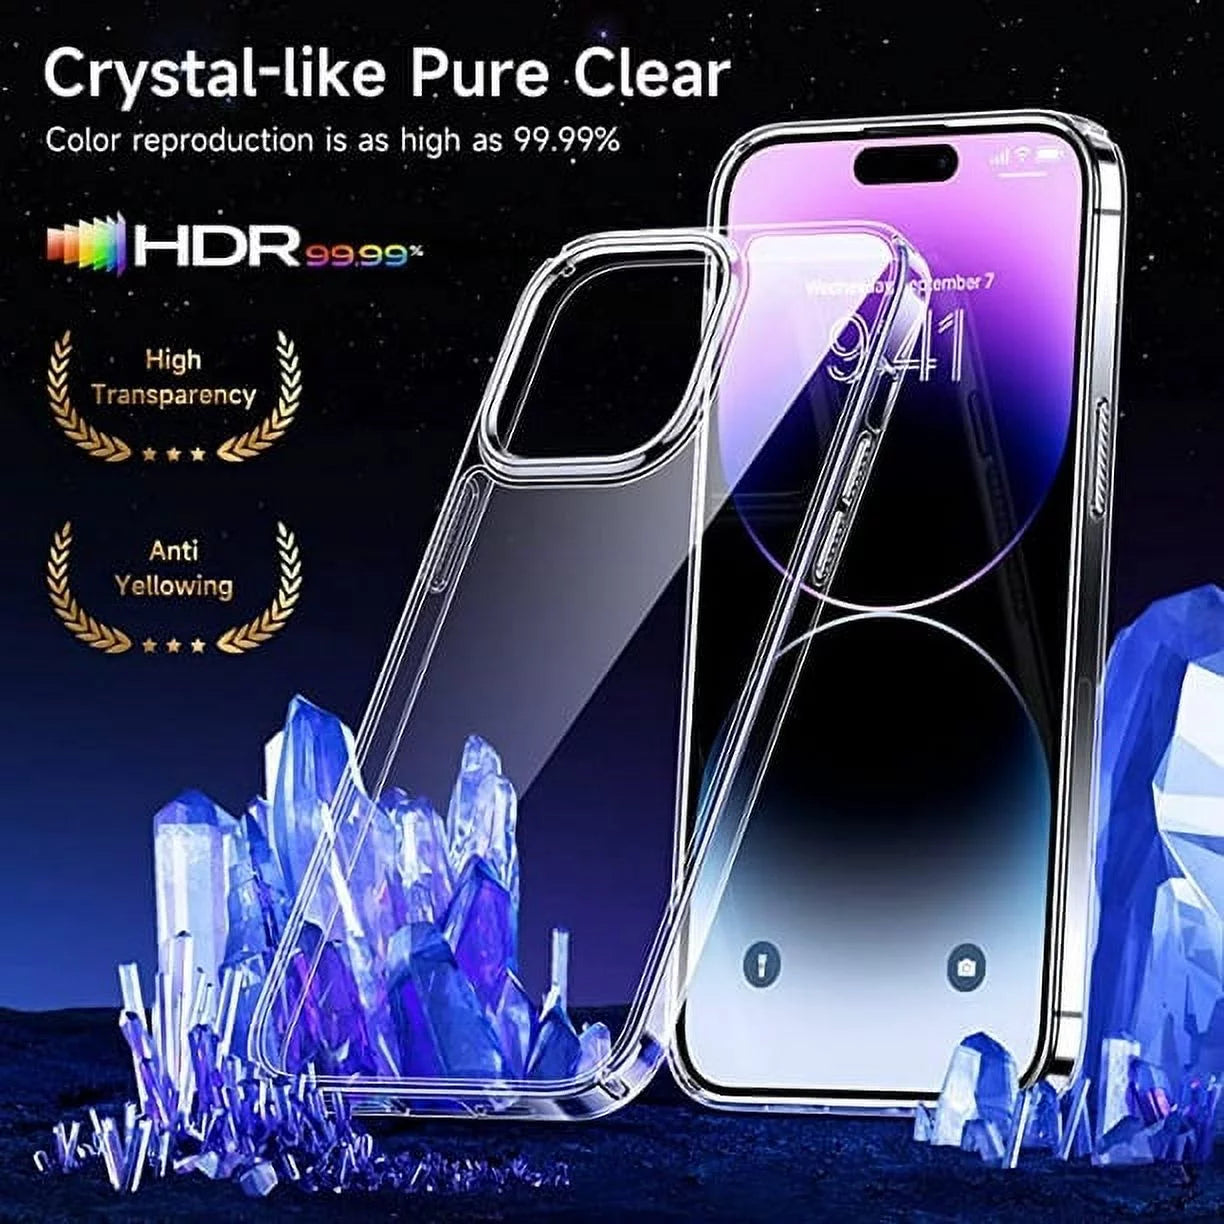 iP X/XS ALL Clear Cases